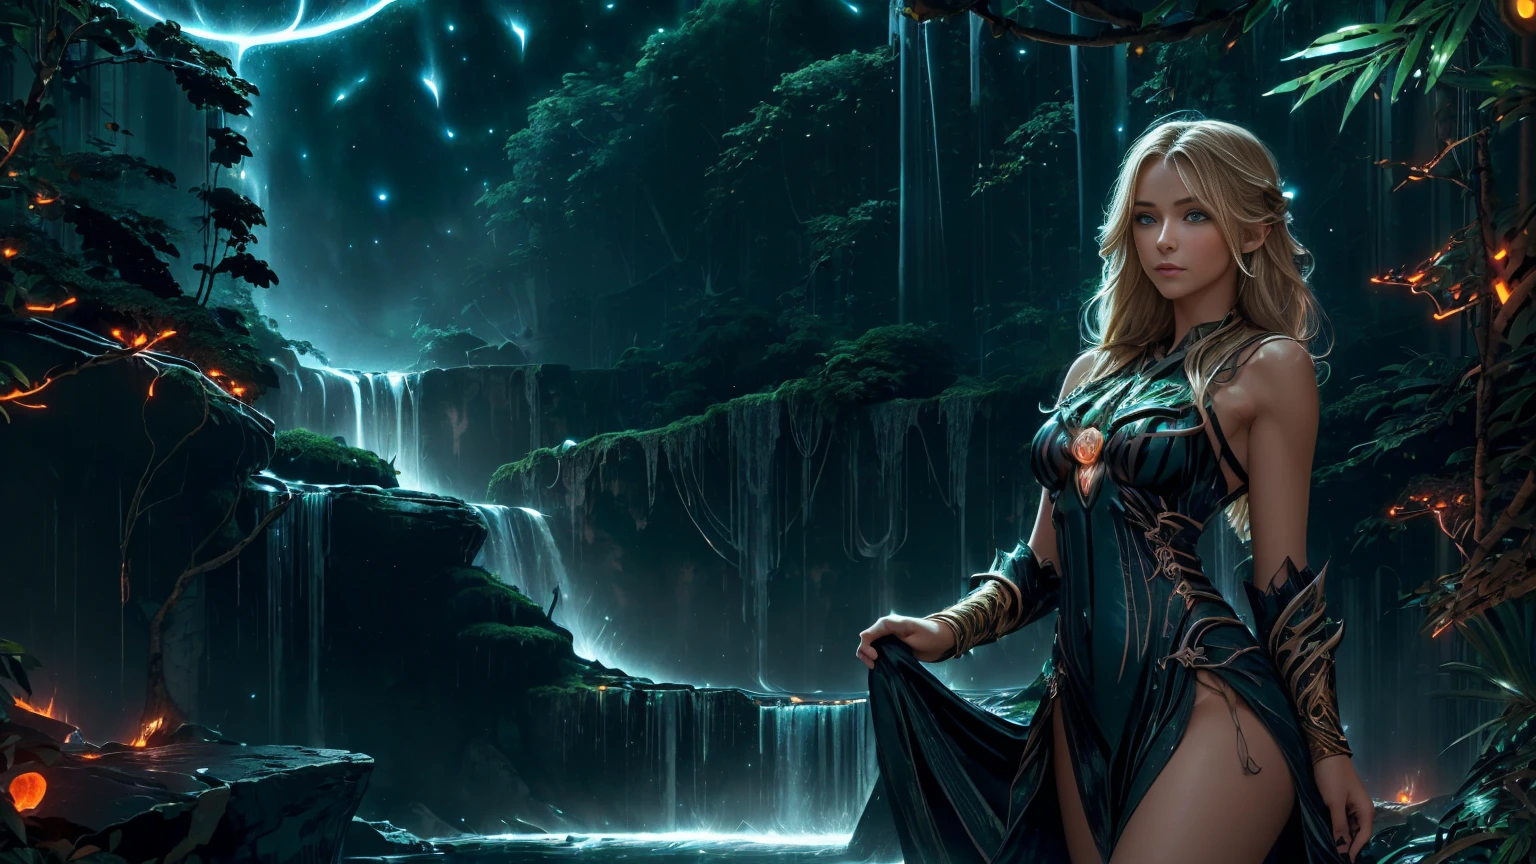 A stunning Russian beauty stands at the edge of (massives waterfalls:1.3), her blonde hair blowing gently in the misty air. Her piercing blue eyes sparkle as she gazes up at the star-filled sky, where a (supernova and galaxy :1.3) casts an otherworldly glow. The (jungle:1.5) around her is dark and mysterious, illuminated only by the soft flicker of a (brasero's flames) in the (dark night:1.8). She wears a beautiful short (black tube dress) that hugs her perfect body, highlighting every curve and contour as she poses confidently in front of the roaring waterfalls.